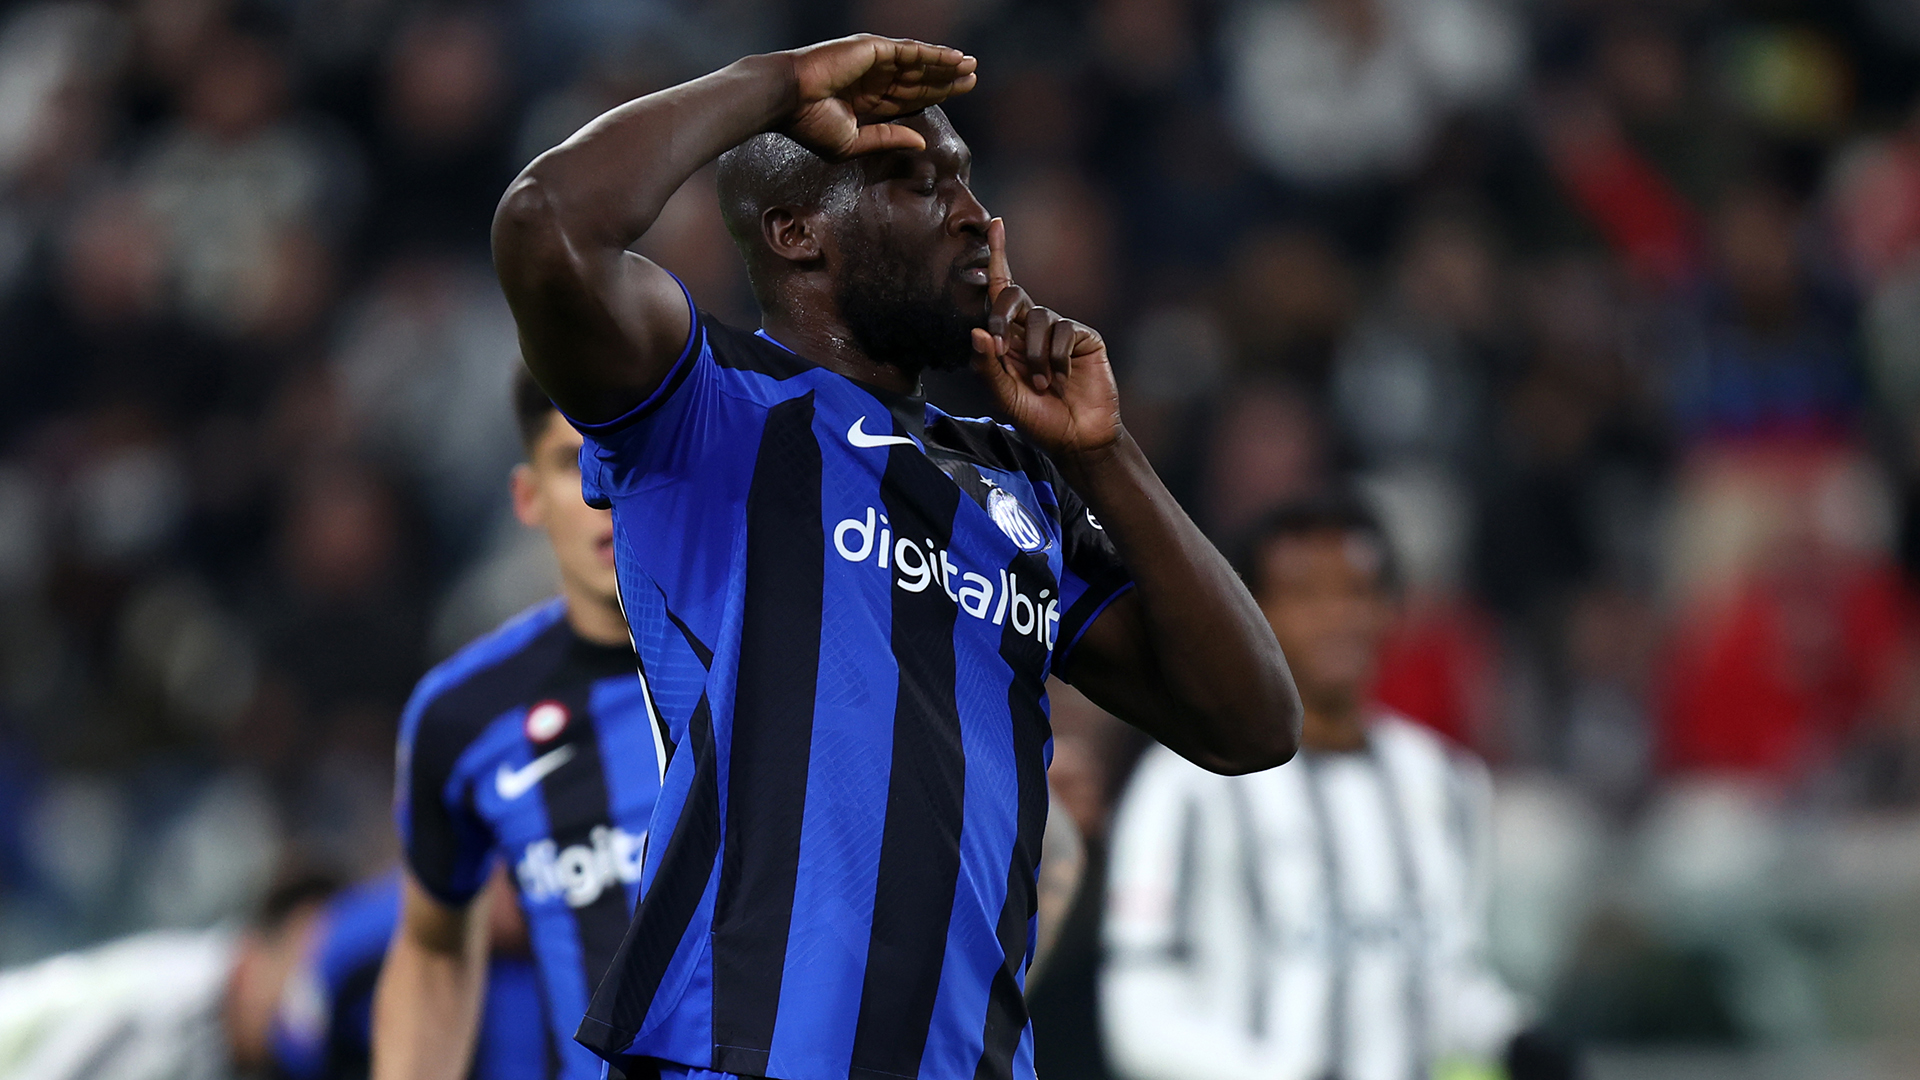 Romelu Lukaku of FC Internazionale celebrates after scoring his team's first goal during the Coppa Italia Semi Final match between Juventus FC and FC Internazionale at Allianz Stadium on April 4, 2023 in Turin, Italy.